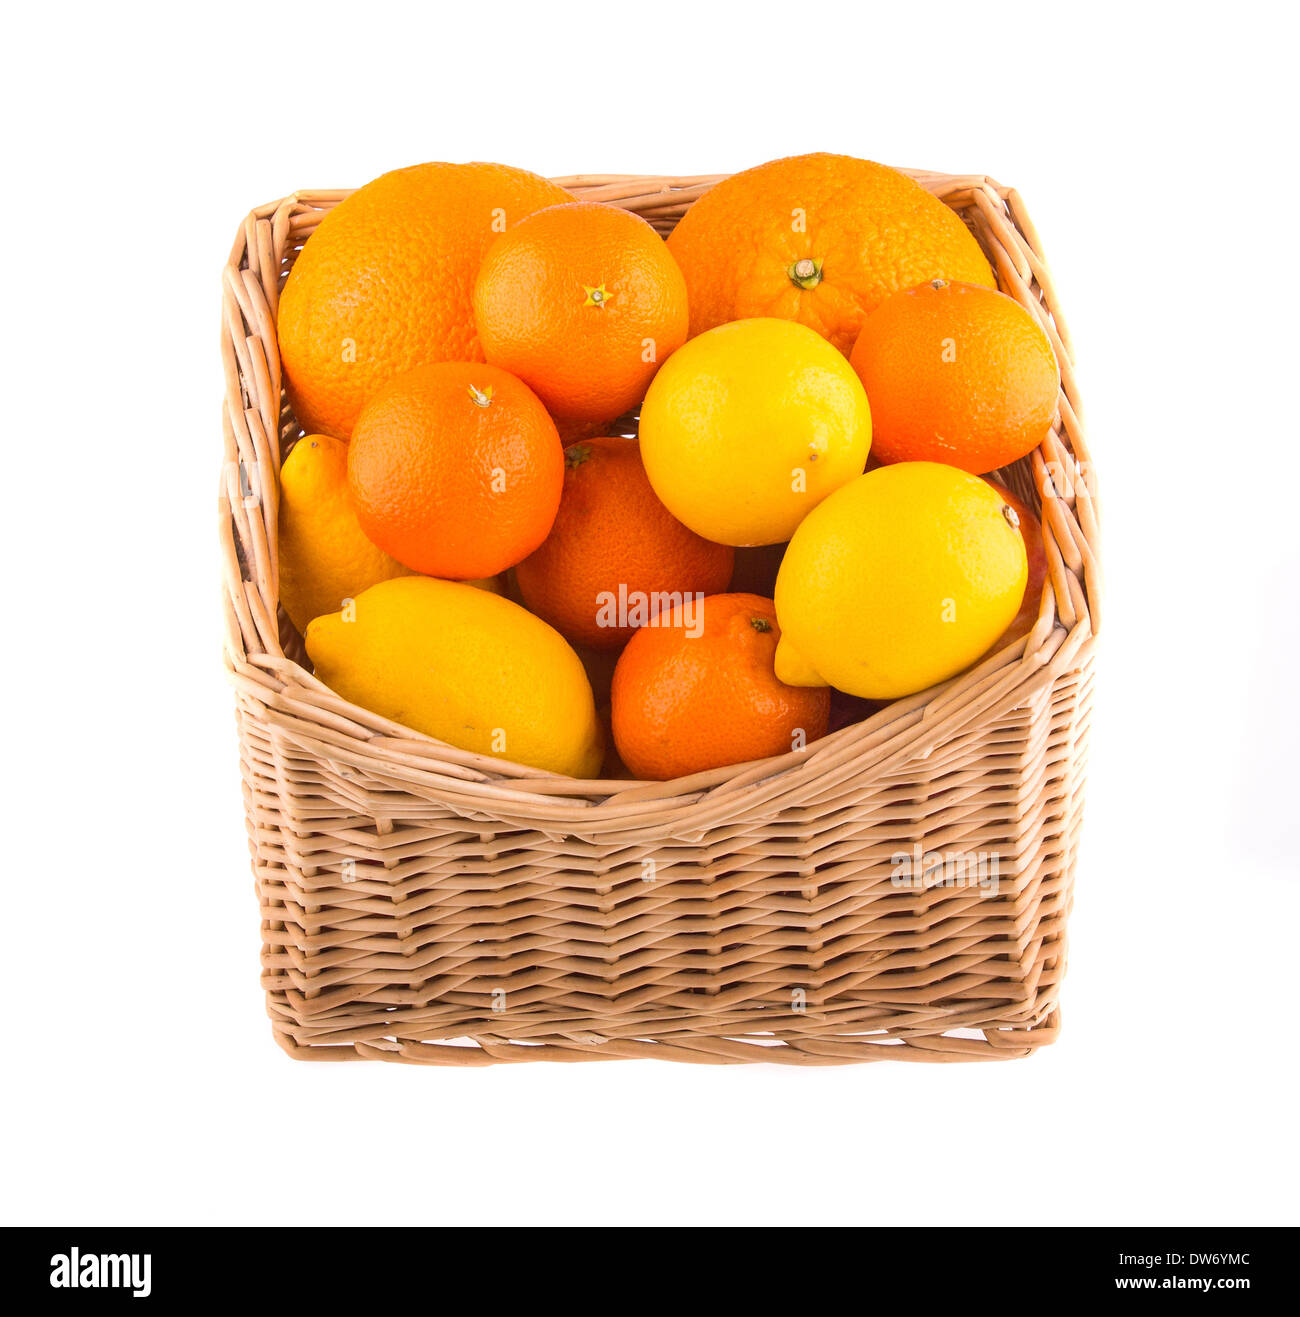 Oranges and lemons in a wooden basket, isolated on white background. Stock Photo